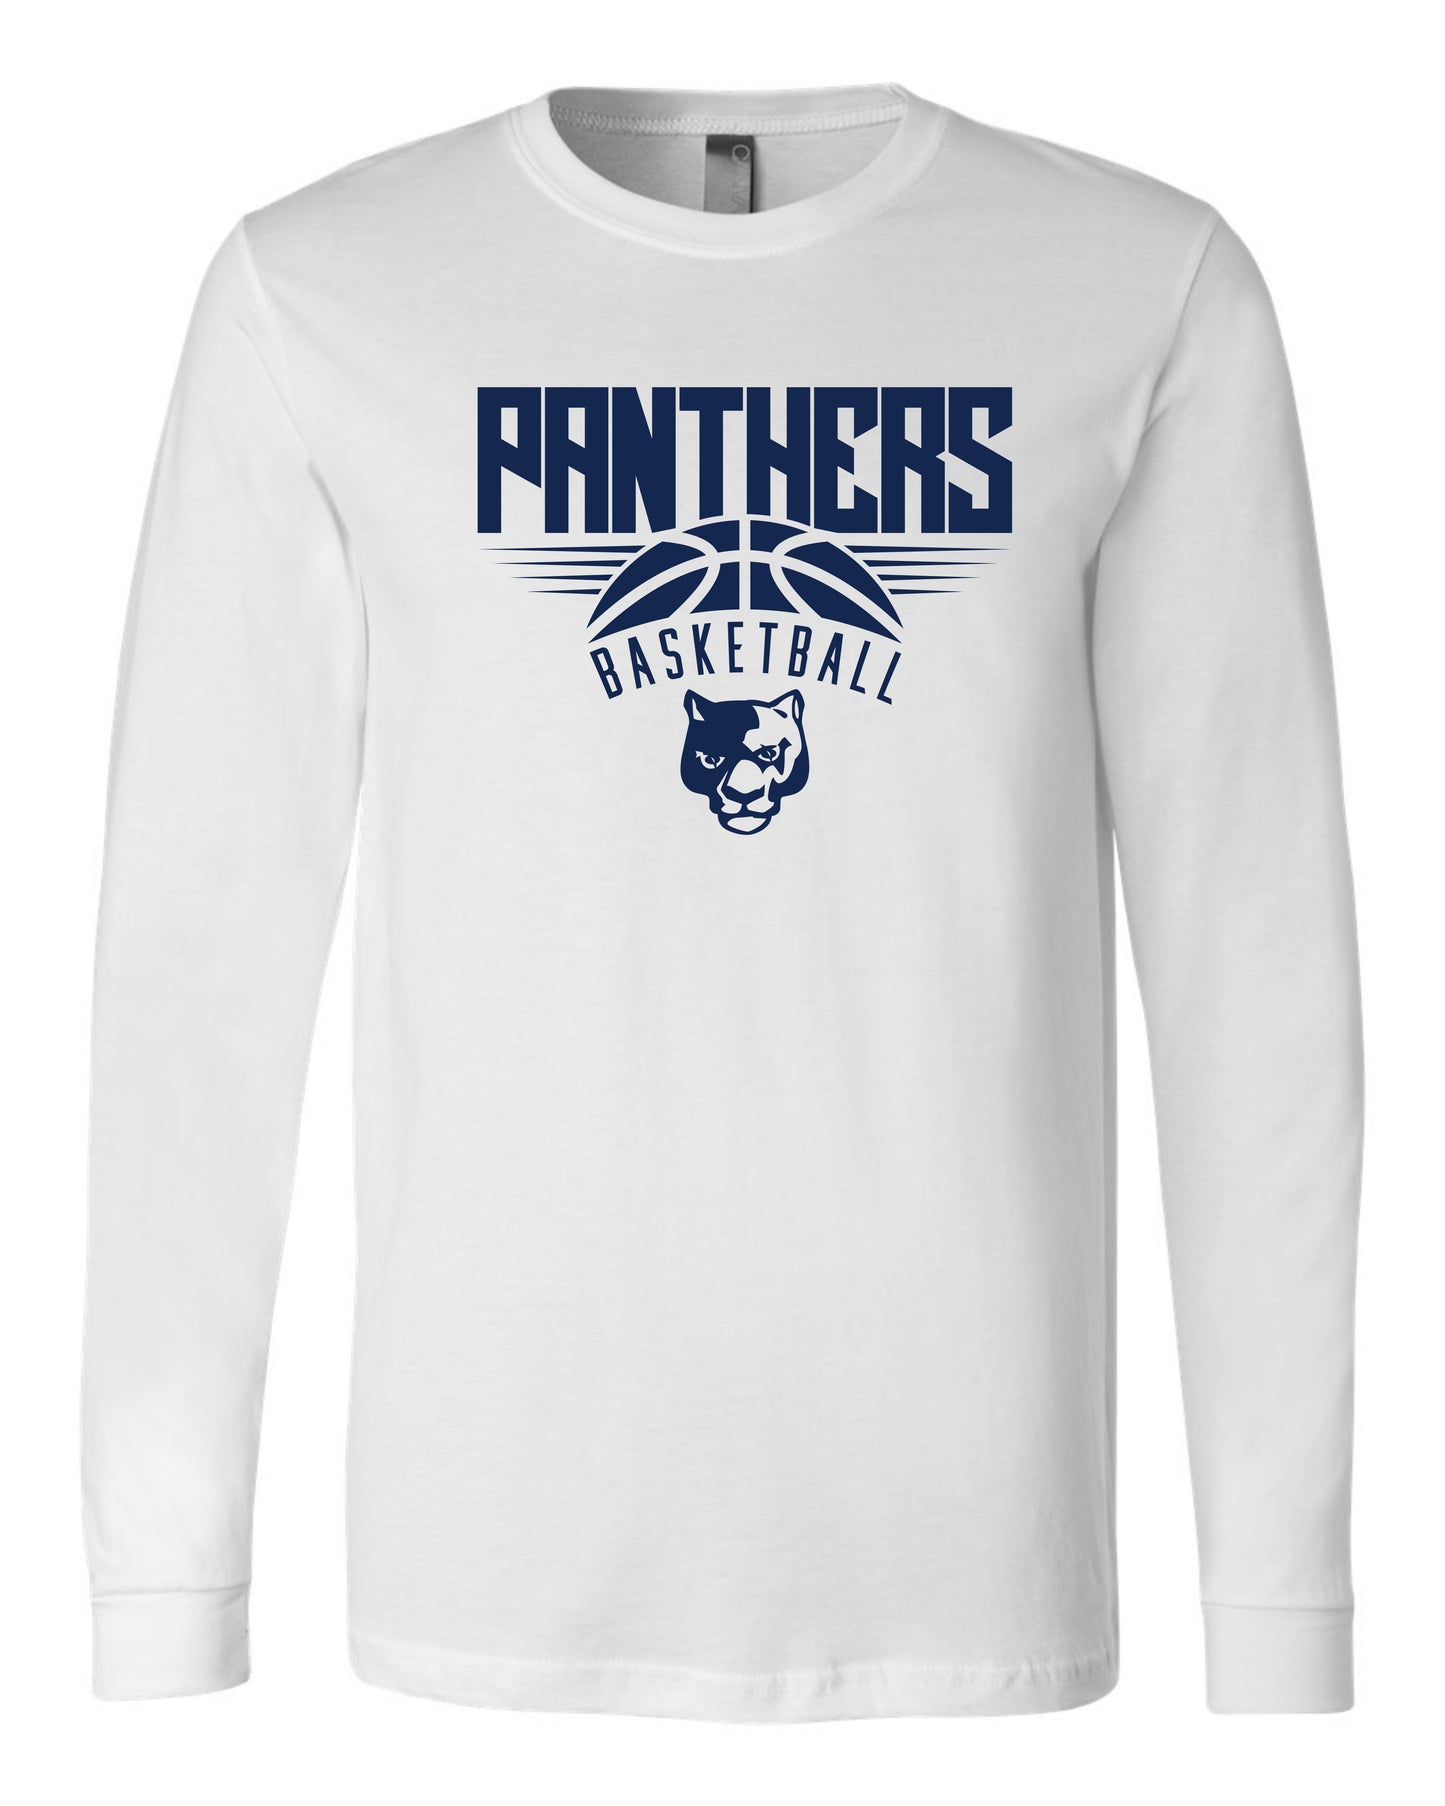 Panthers Basketball - Youth Long Sleeve